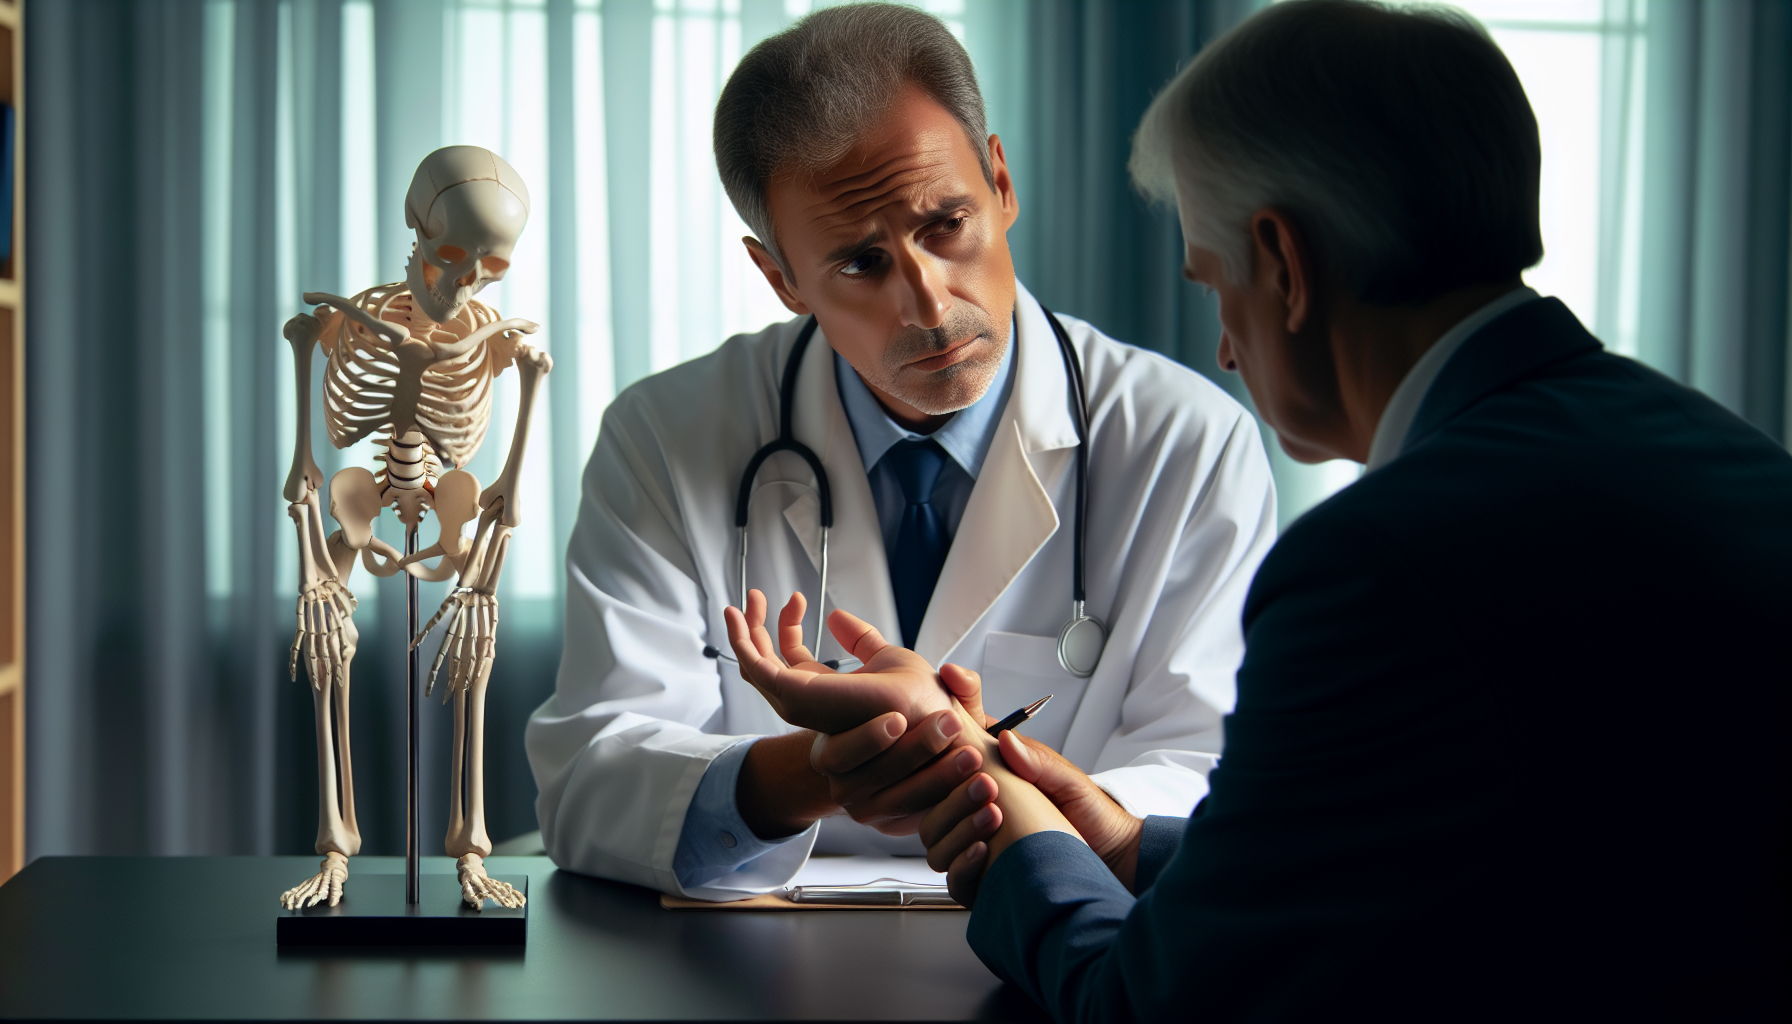 Illustration of a person consulting with a doctor